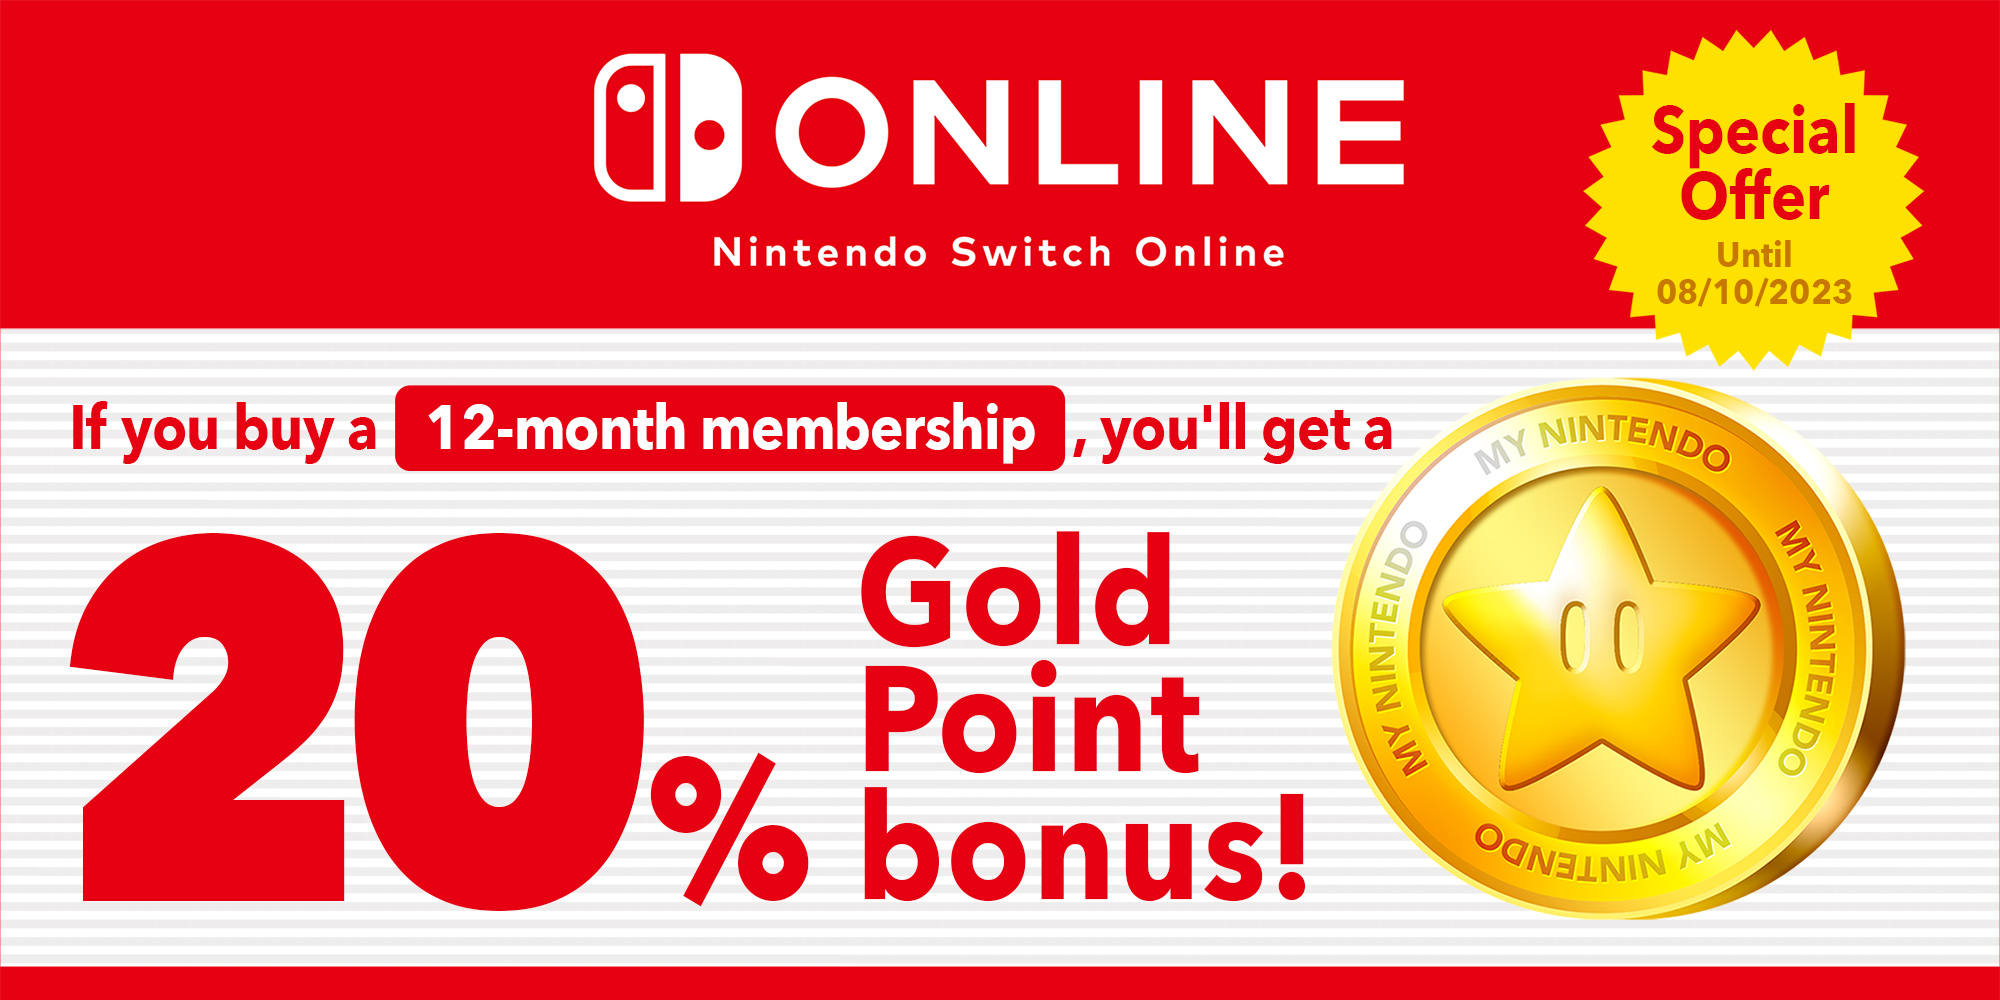 Special offer: You can earn up to £12.00/€14.00 in Gold Points with 12-month Nintendo Switch Online memberships!